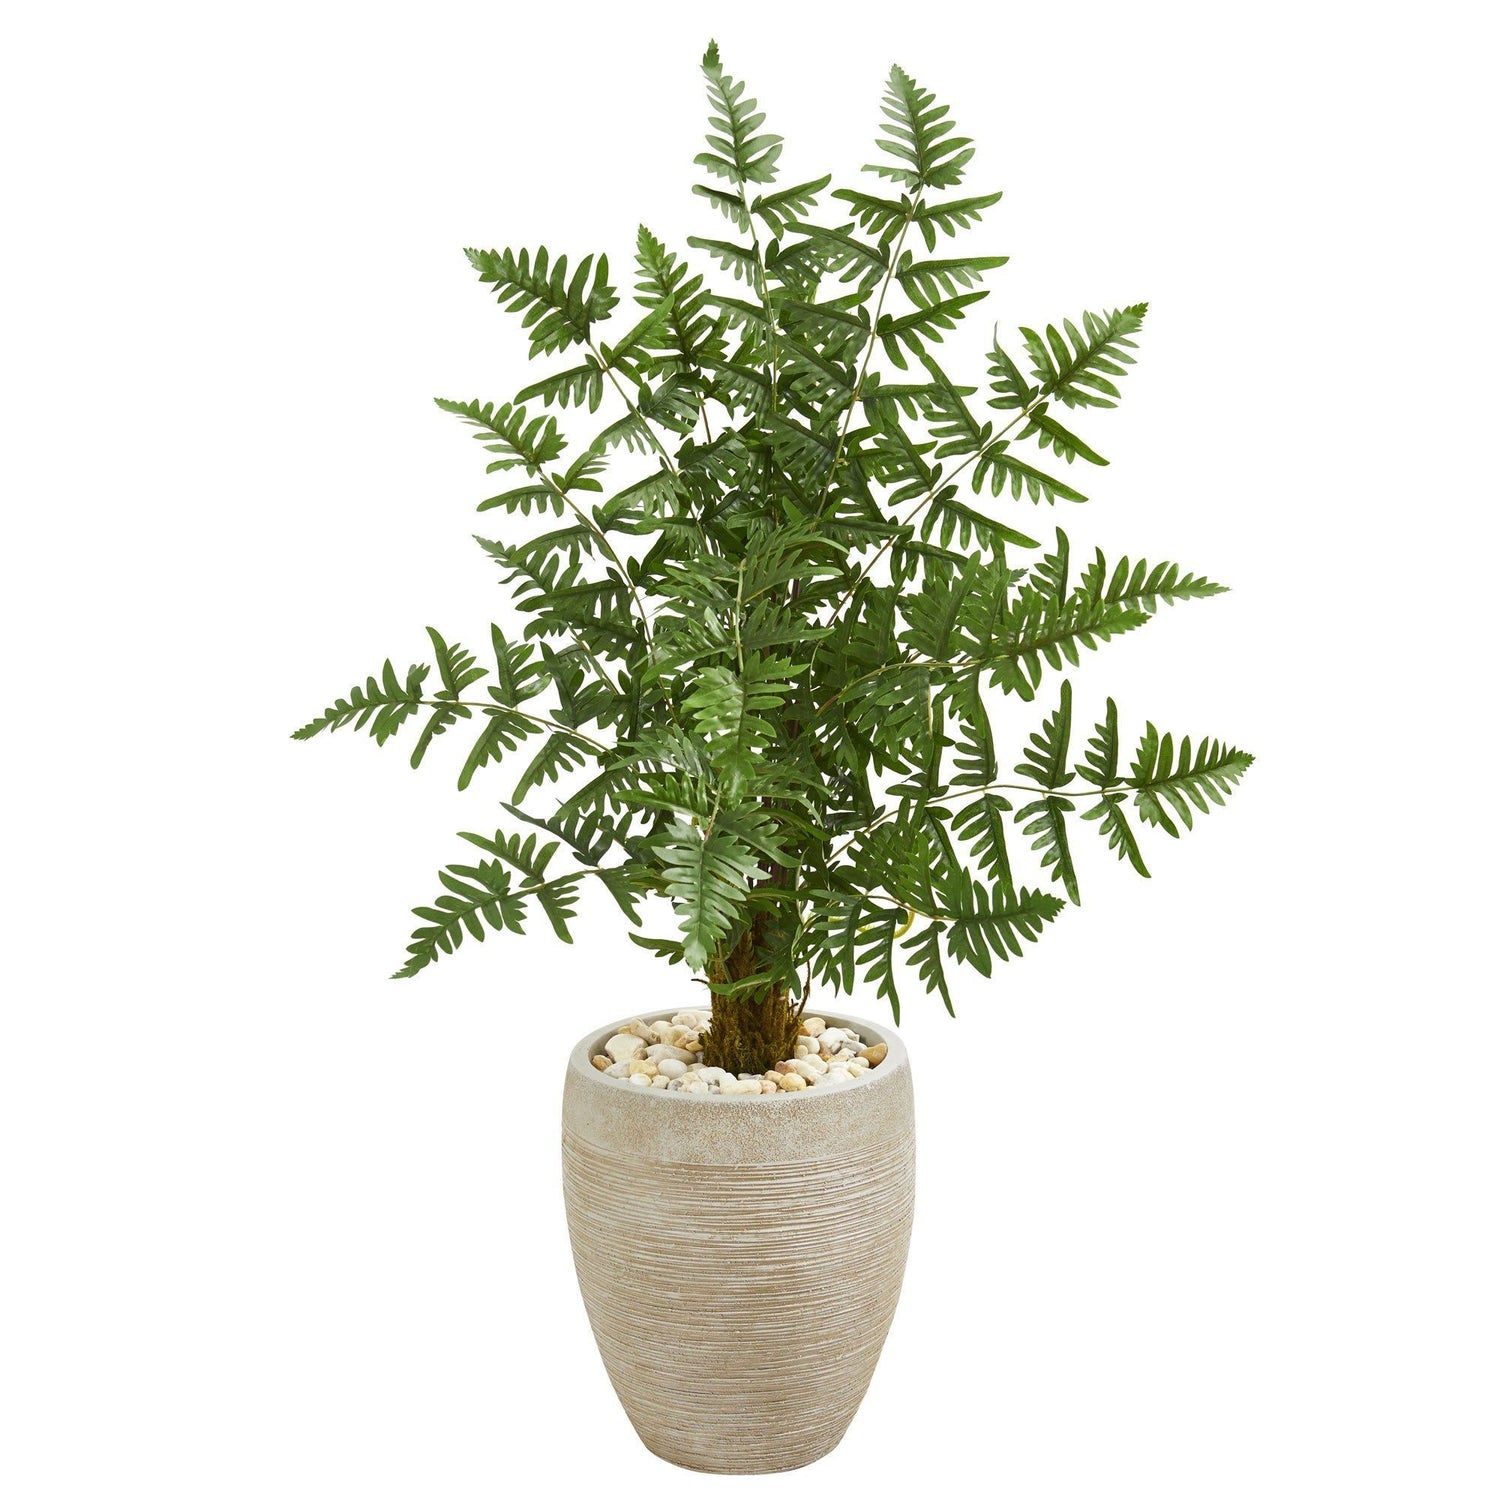 Ruffle Fern Palm Artificial Tree in Sand Colored Planter